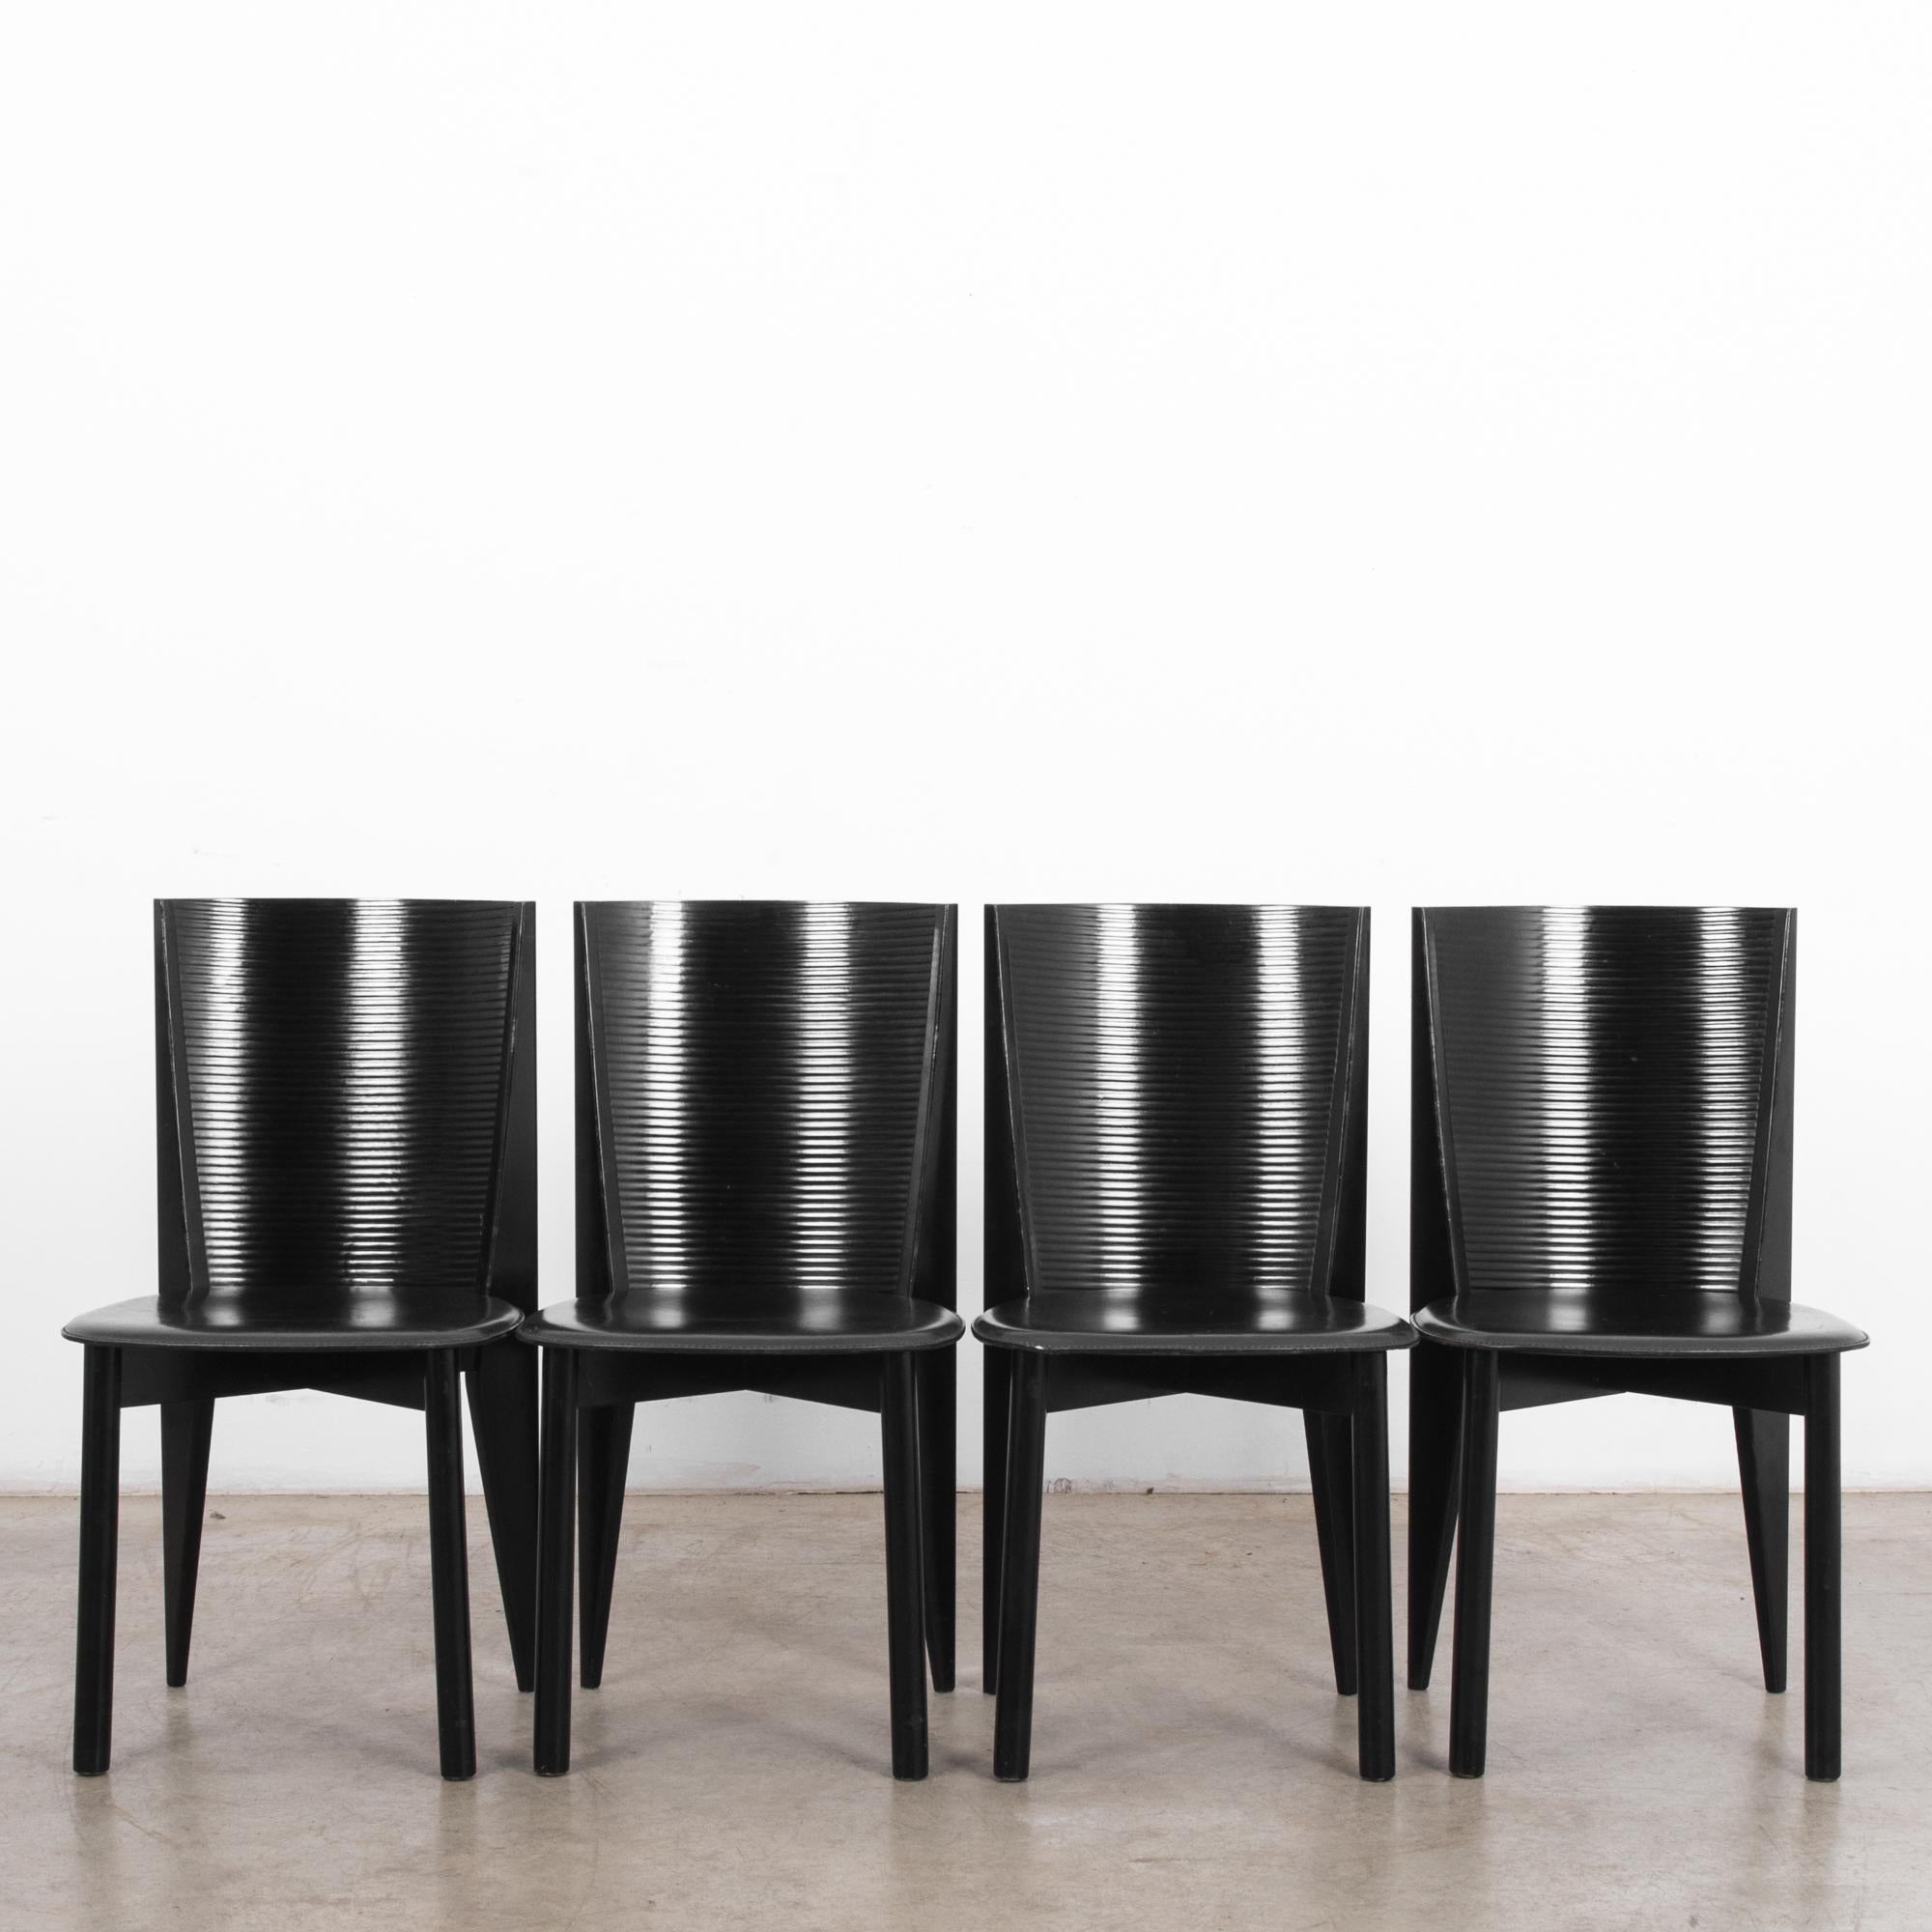 This set of four black wooden chairs by Calligaris was made in Italy, circa 1980. These dining chairs feature a curved back with ridges and leather seats. The tapered and angular rear posts counterbalance the cylindrical front legs of this stylish